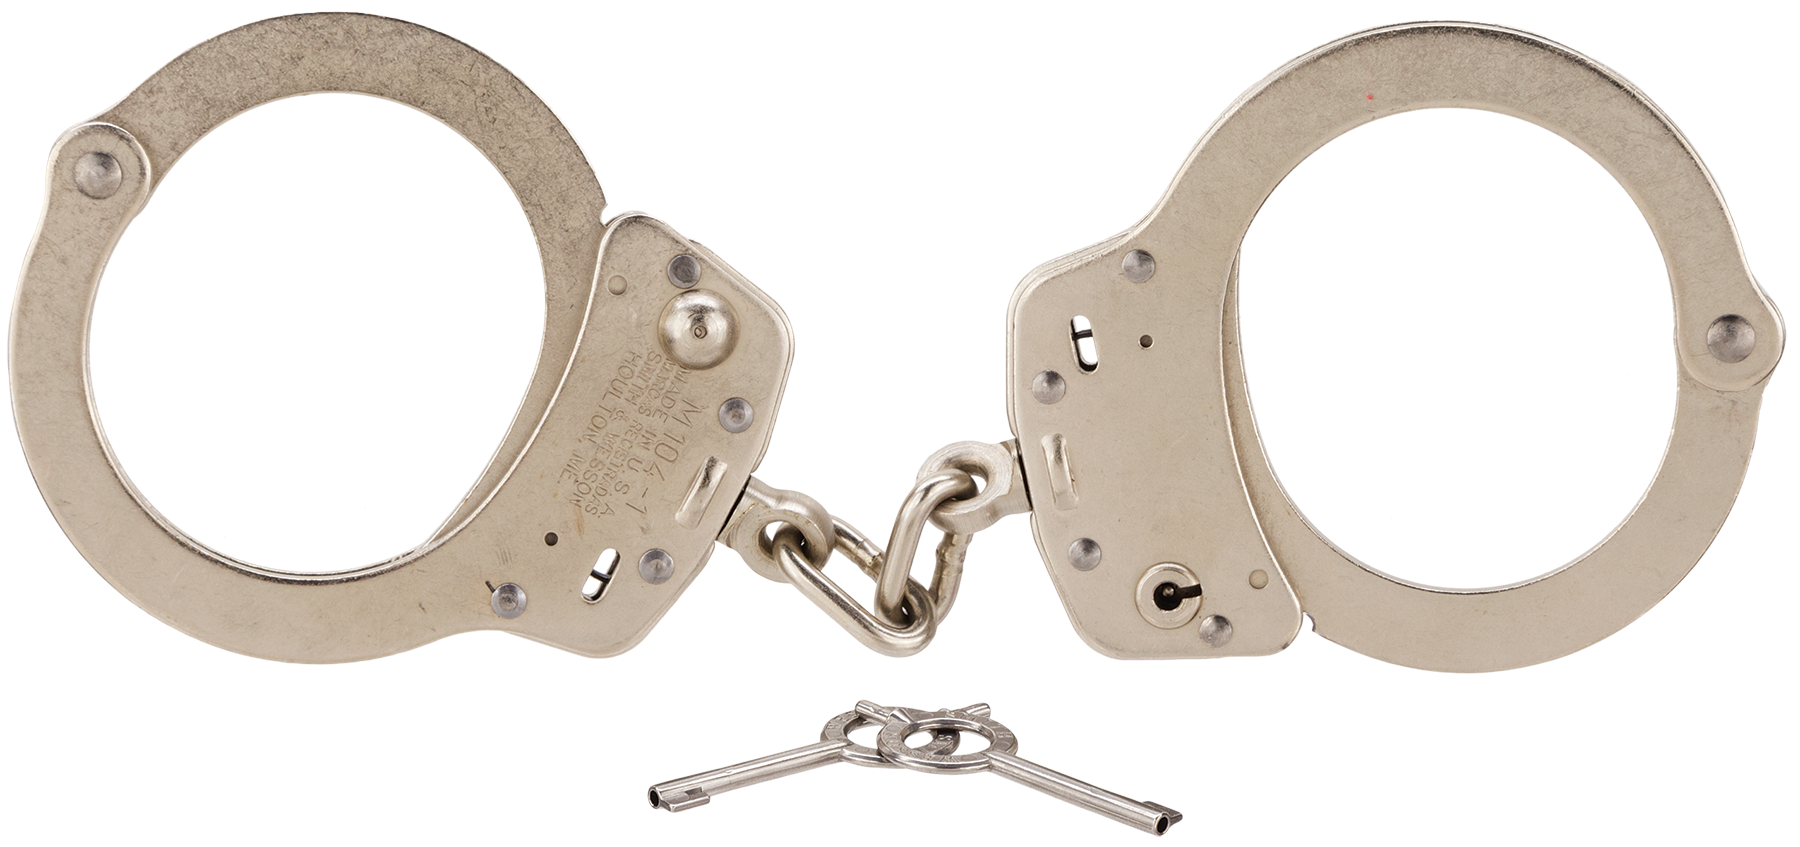 Handcuffs clipart handcuff key. Closed including png image